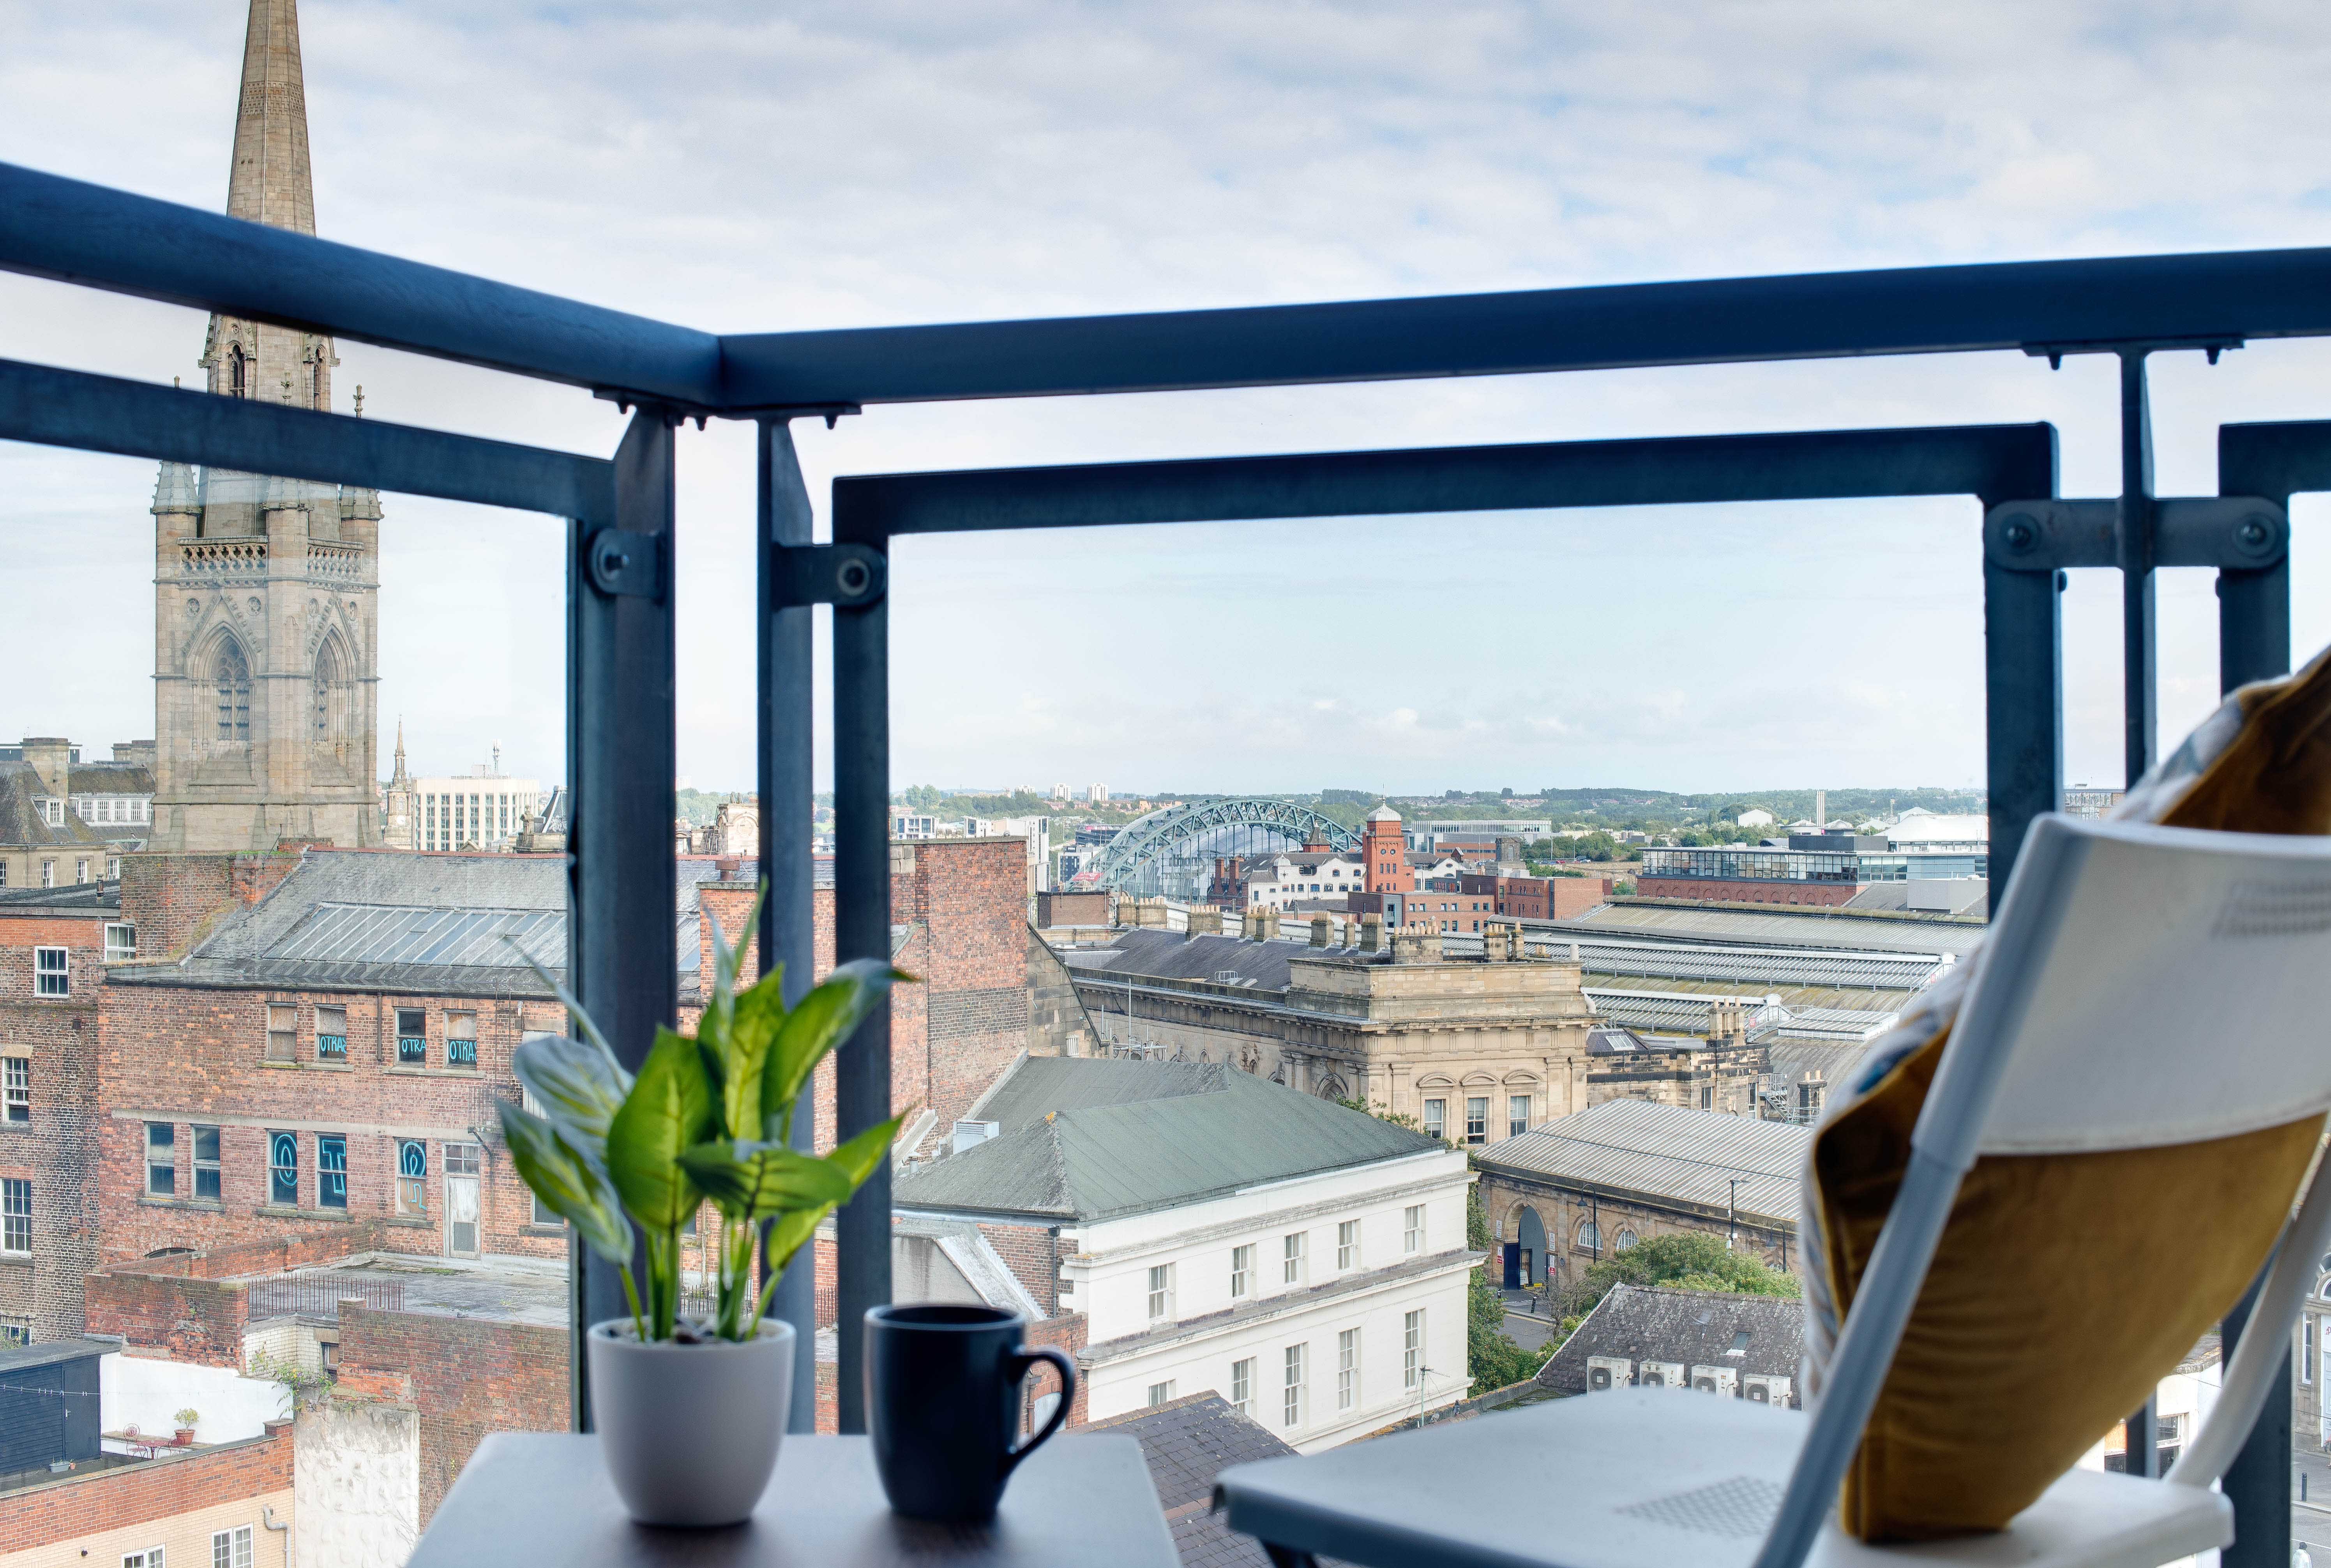 A shot of the Newcastle skyline from a glass-panelled balcony with a chair and side table in the foreground.